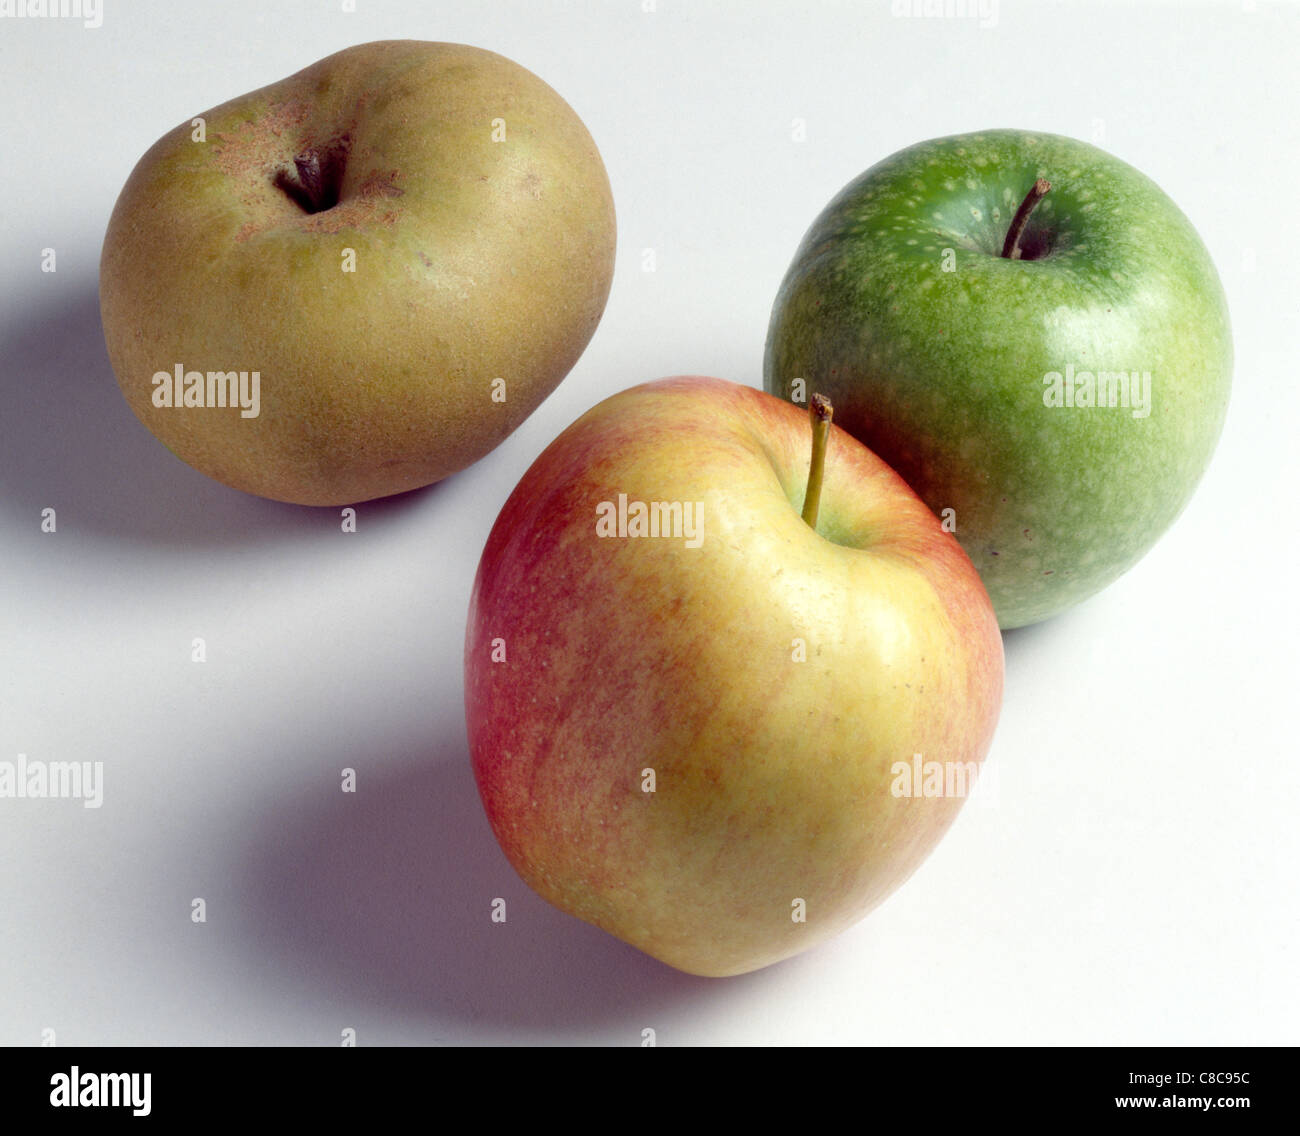 Reinette, Granny Smith and Royal Gala apples Stock Photo